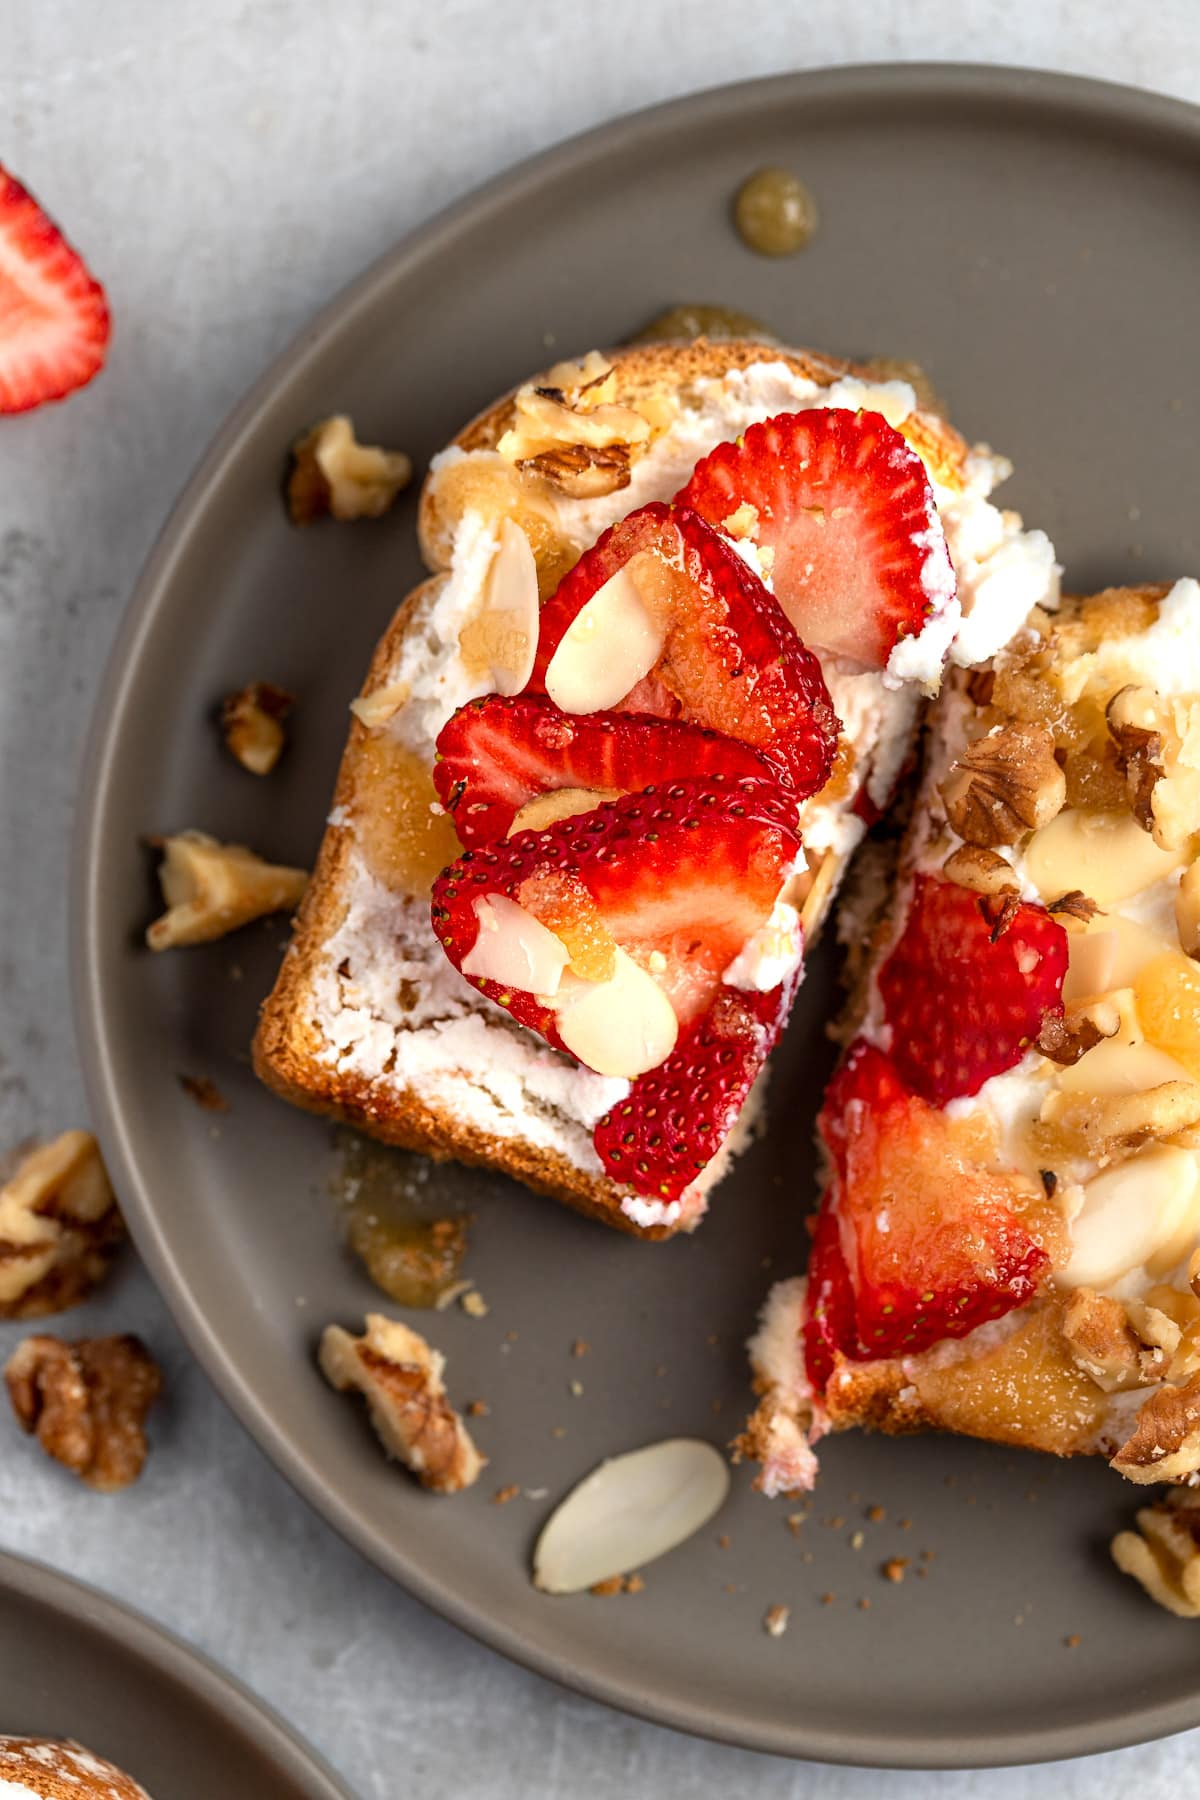 Ricotta honey toast topped with walnuts, almonds and sliced strawberries on a grey plate.